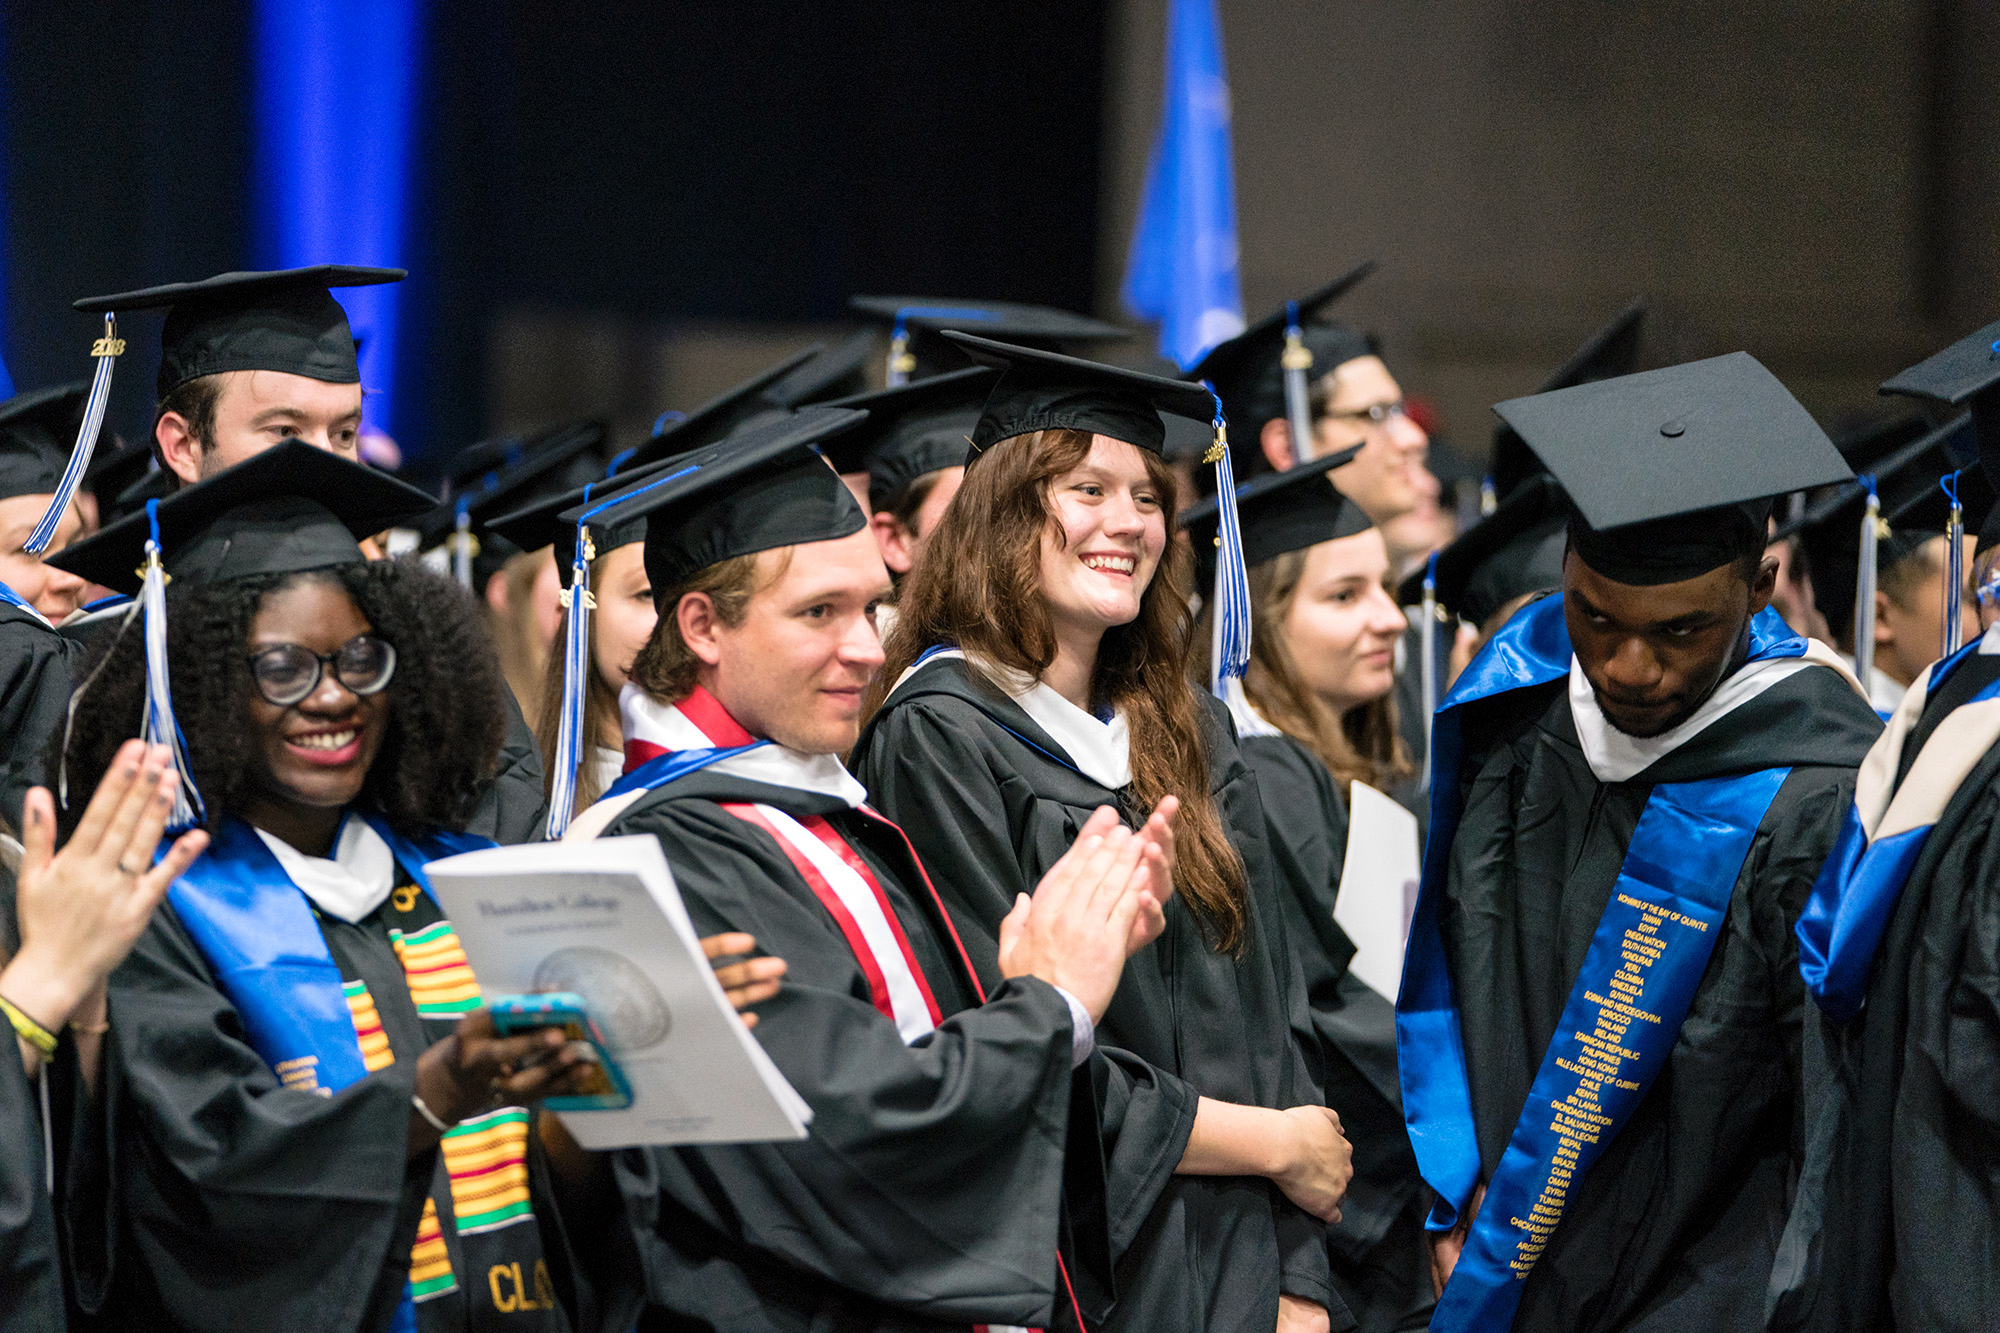 Students present at the convocation ceremony at Hamilton College